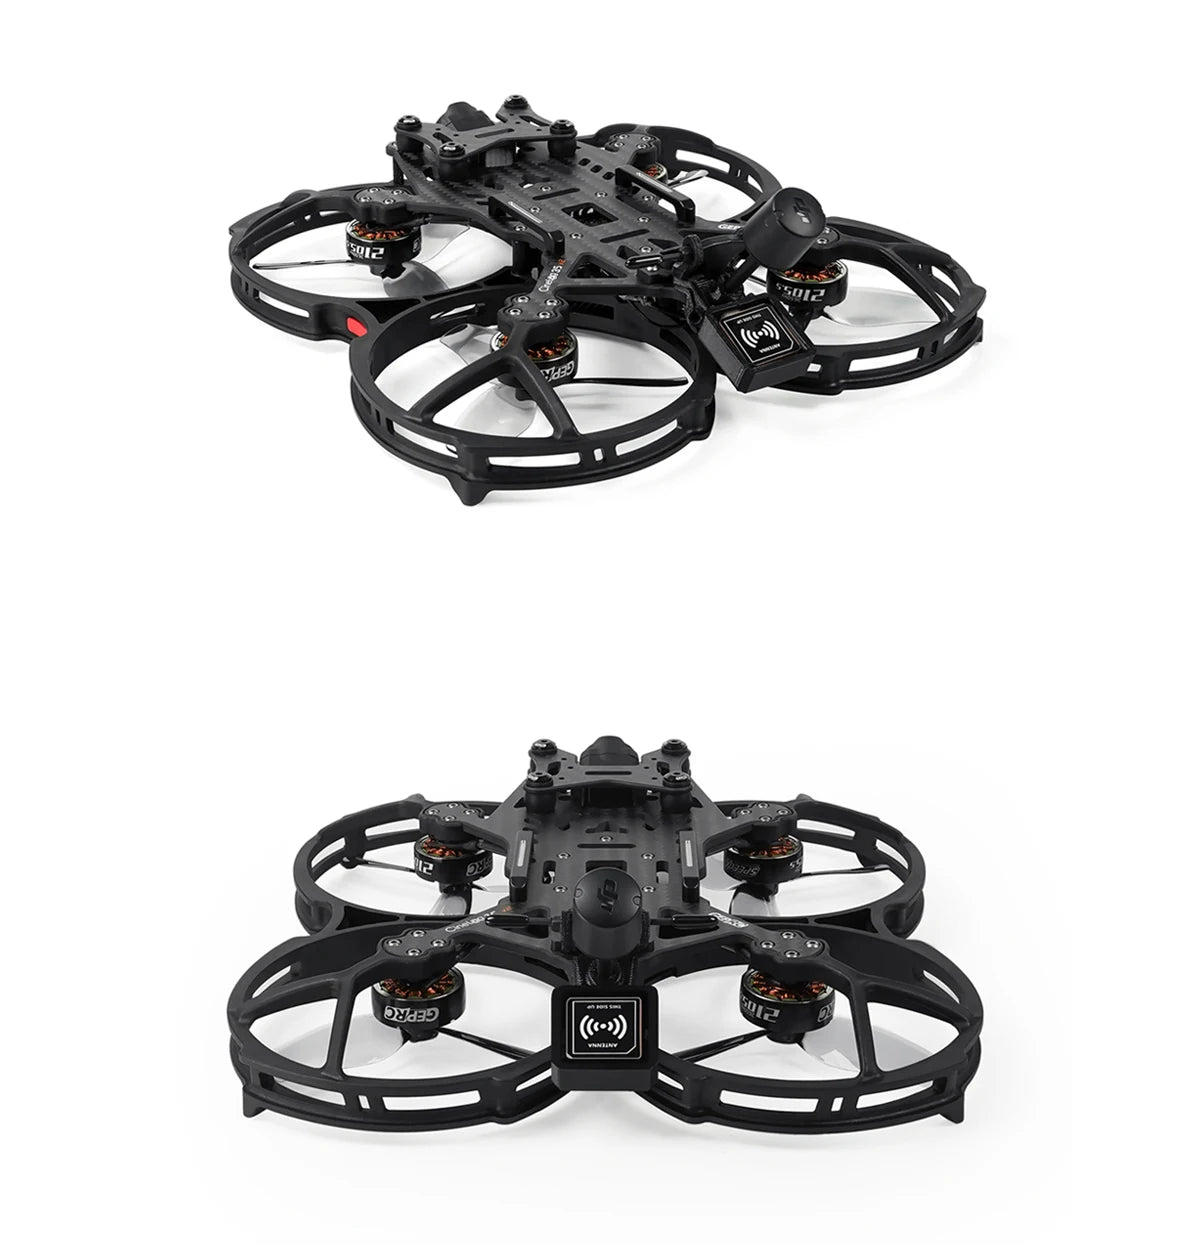 GEPRC CineLog35 V2 HD, Propeller Guard adds memory card and USB ports to O3 Air Unit for easy data reading